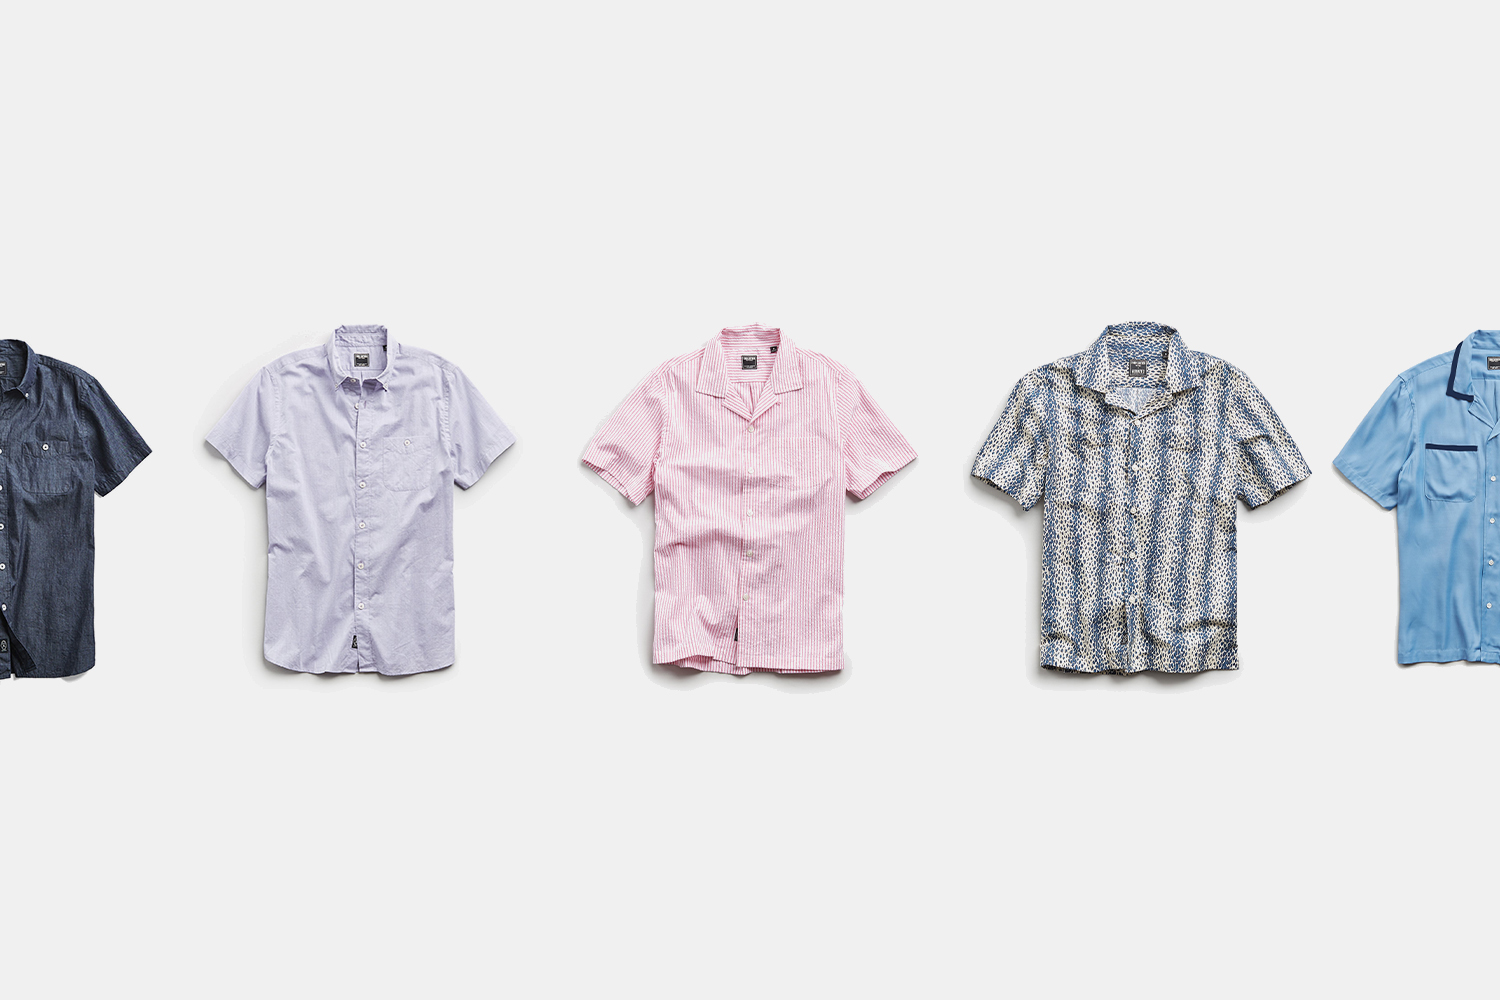 Deal: These Fun Todd Snyder Shirts Are Up to 60% Off